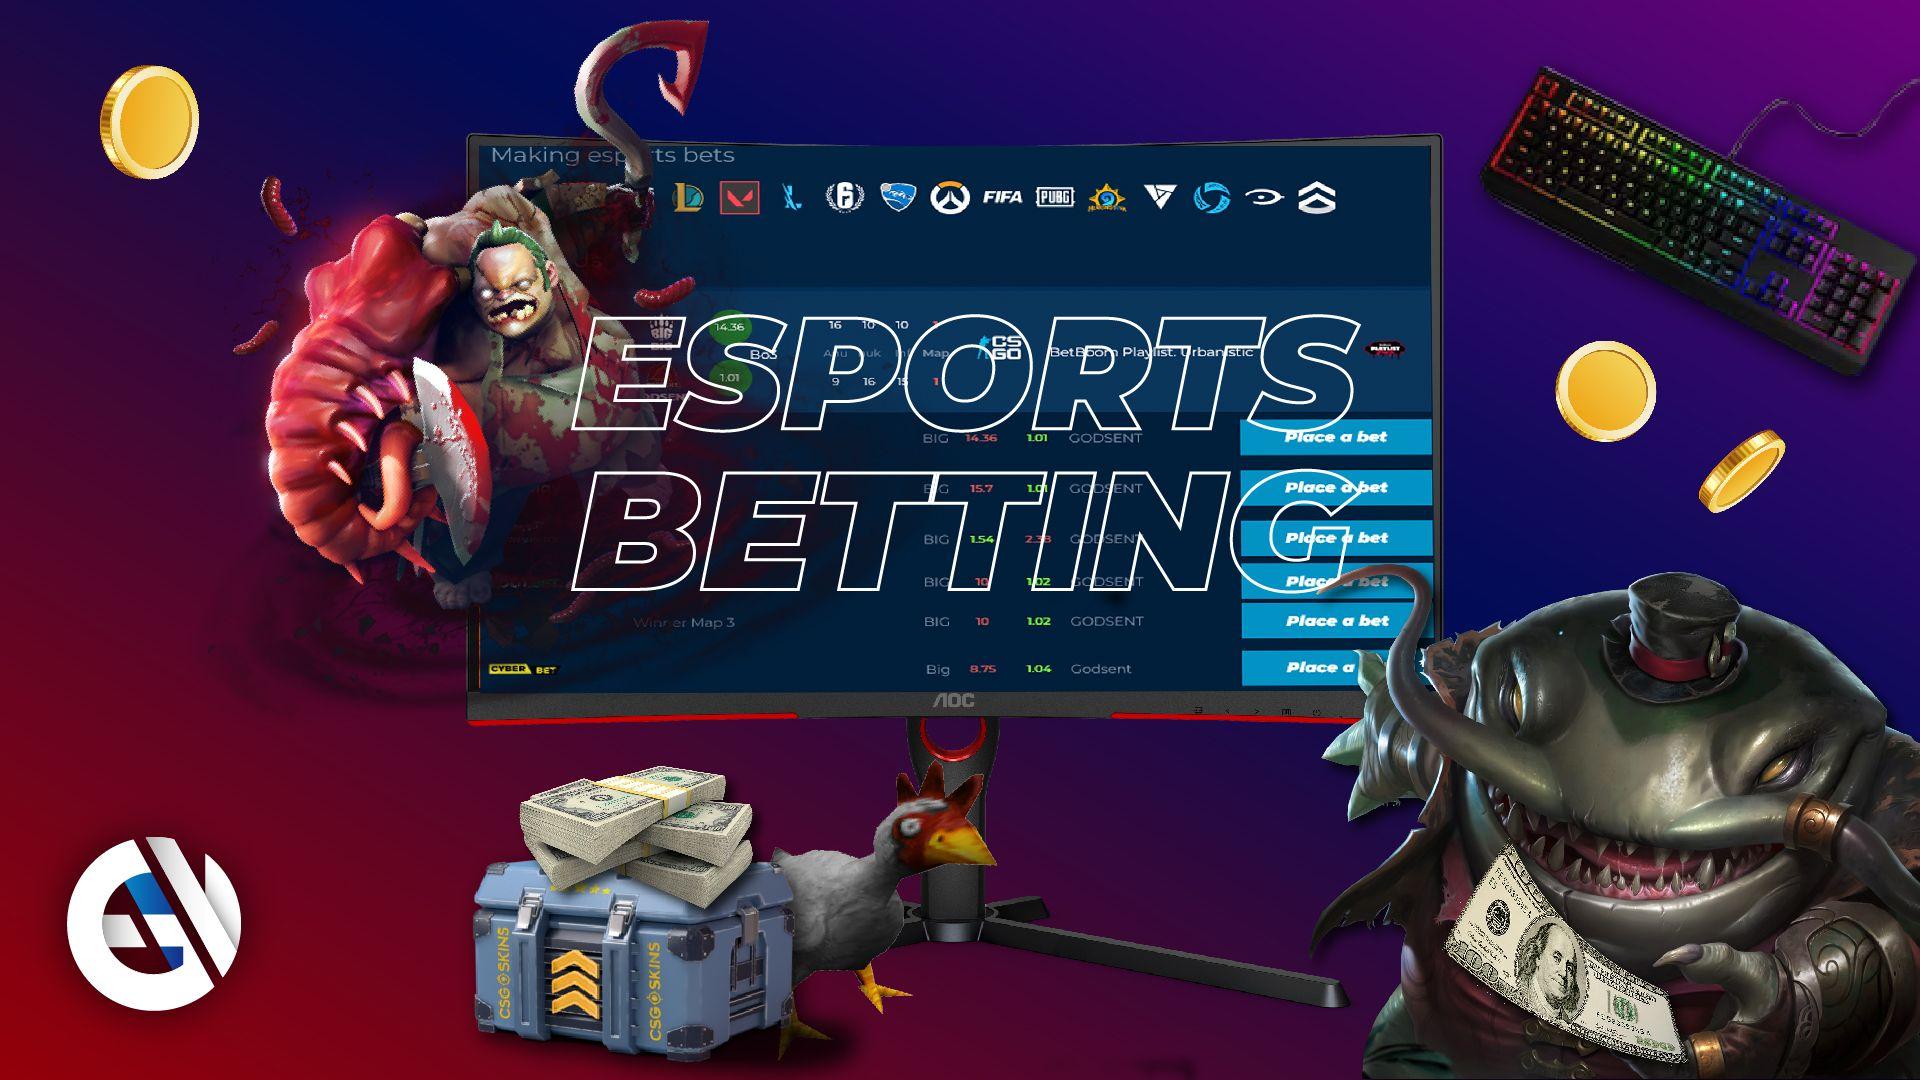 Esports betting with Zimpler - pros and cons